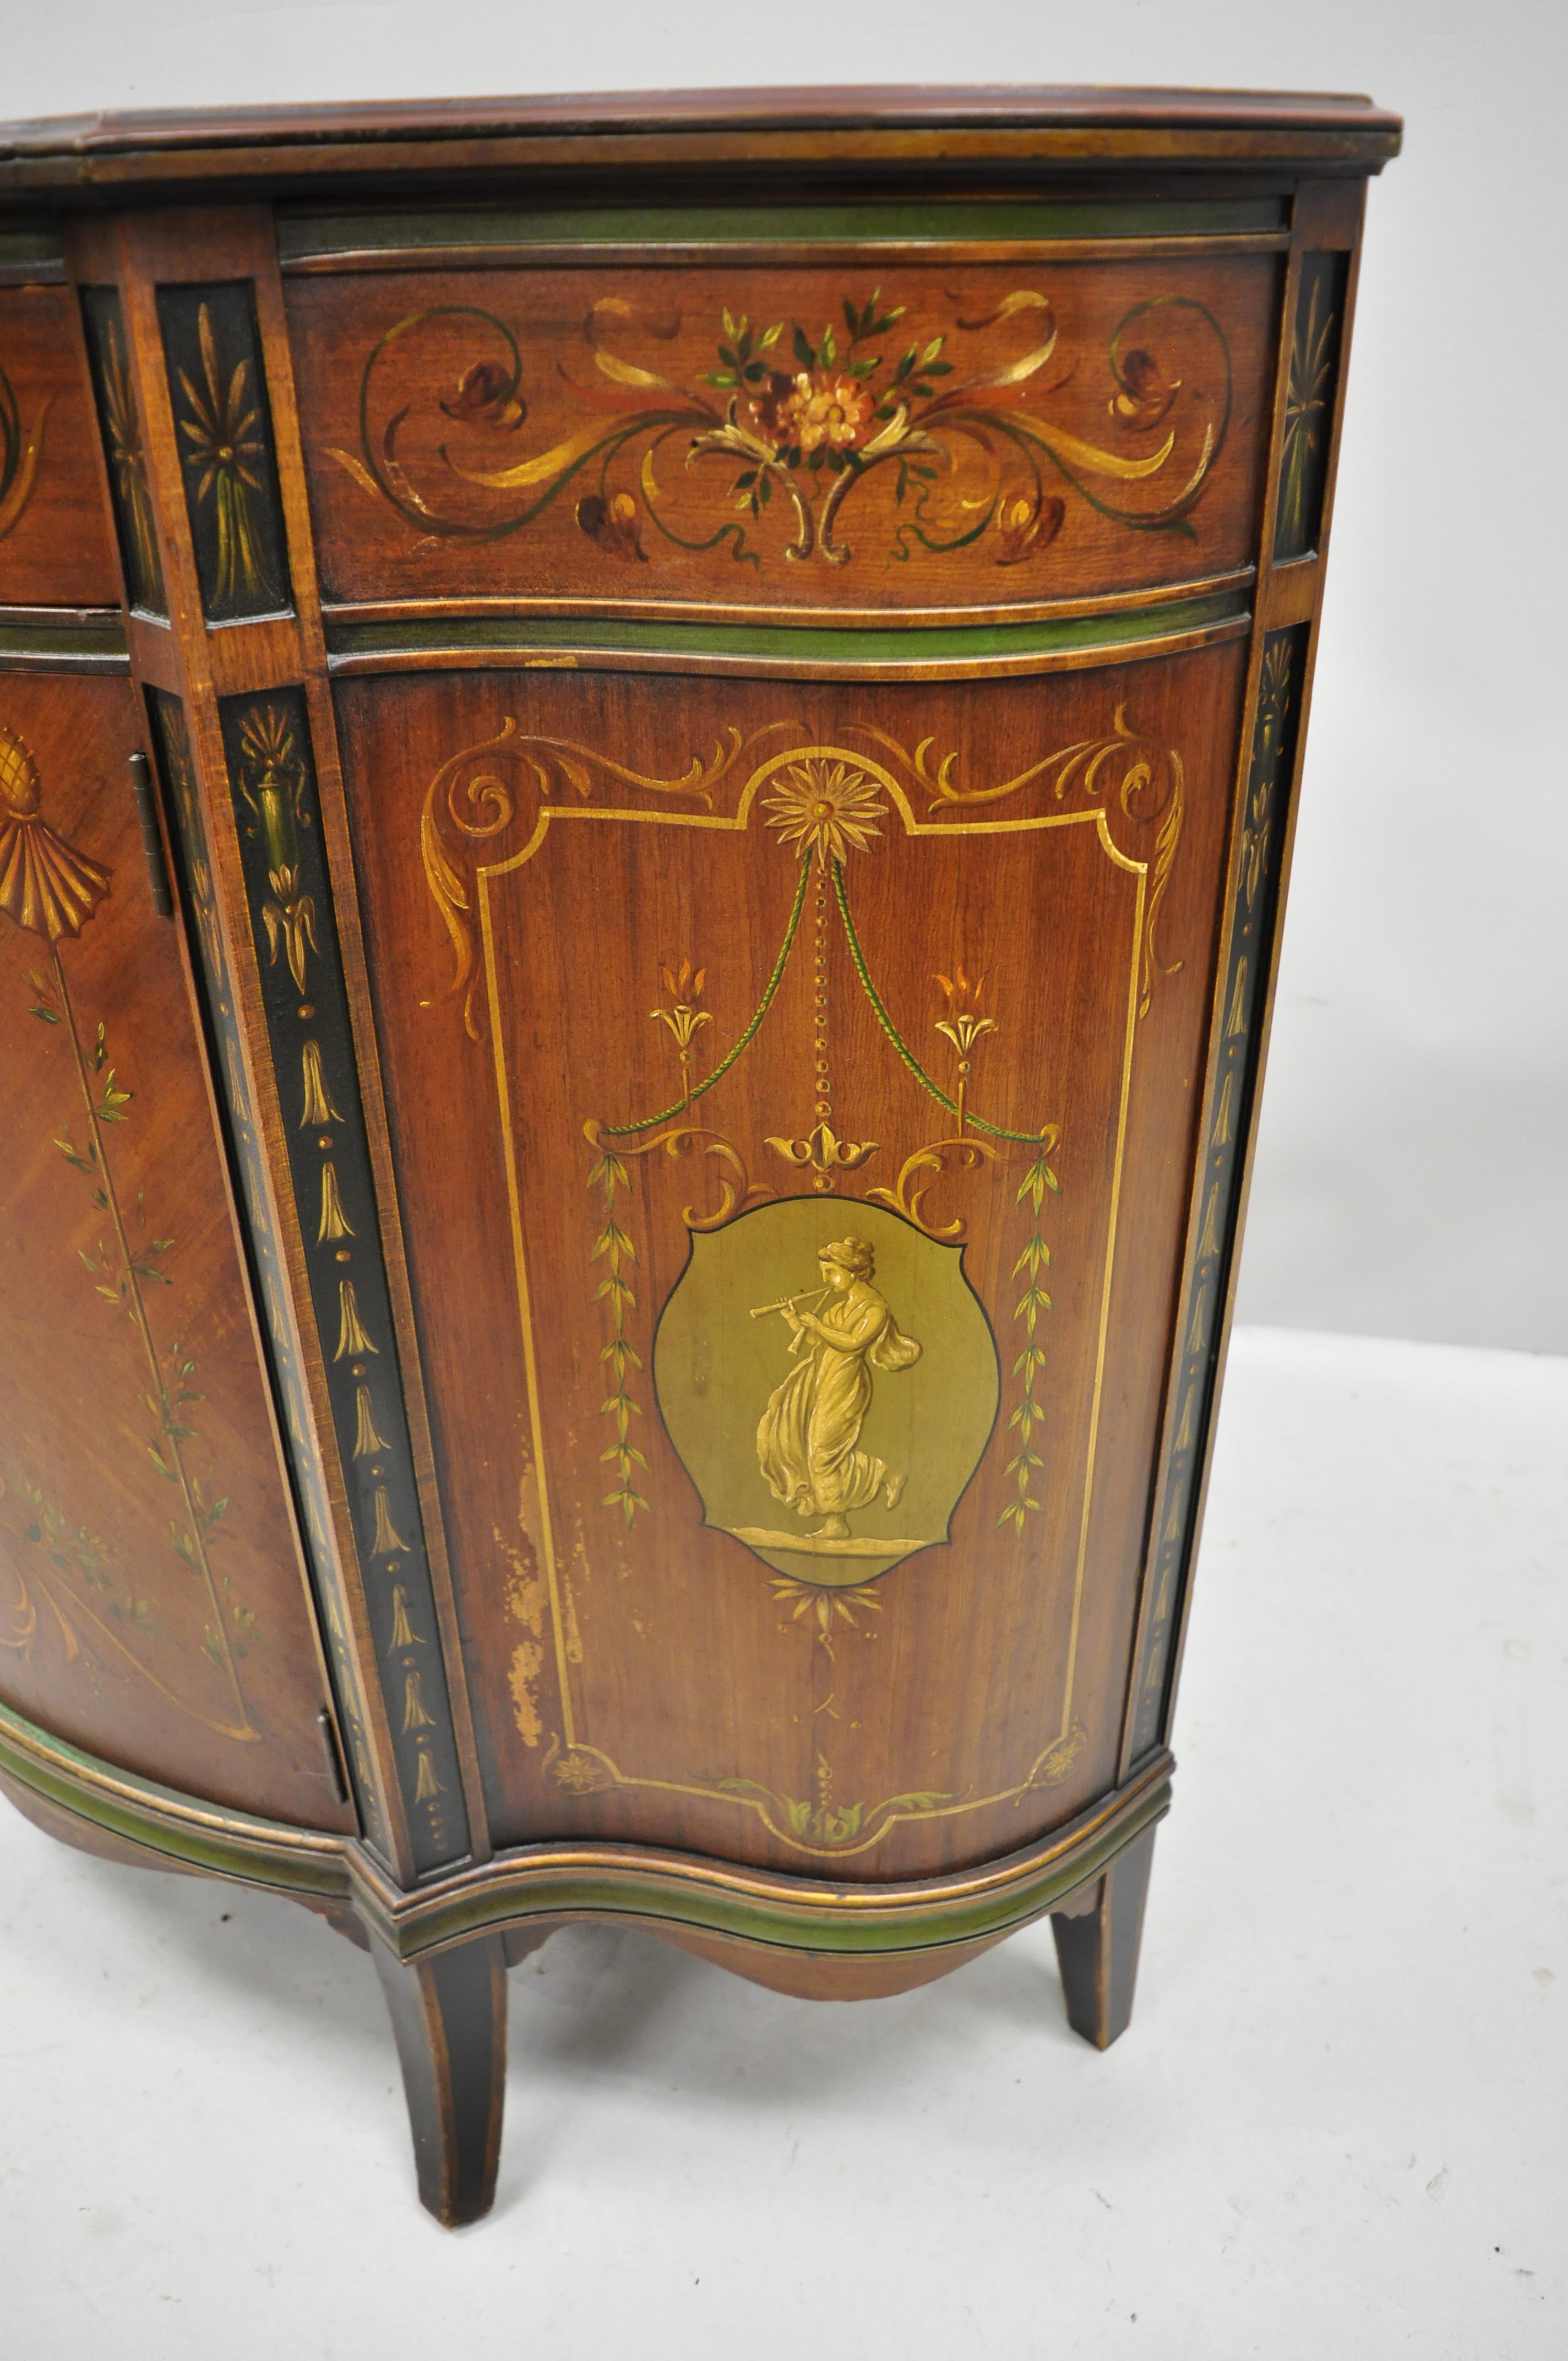 20th Century Johnson Handley Adams Paint Decorated Demilune Bombe Commode Console Table Chest